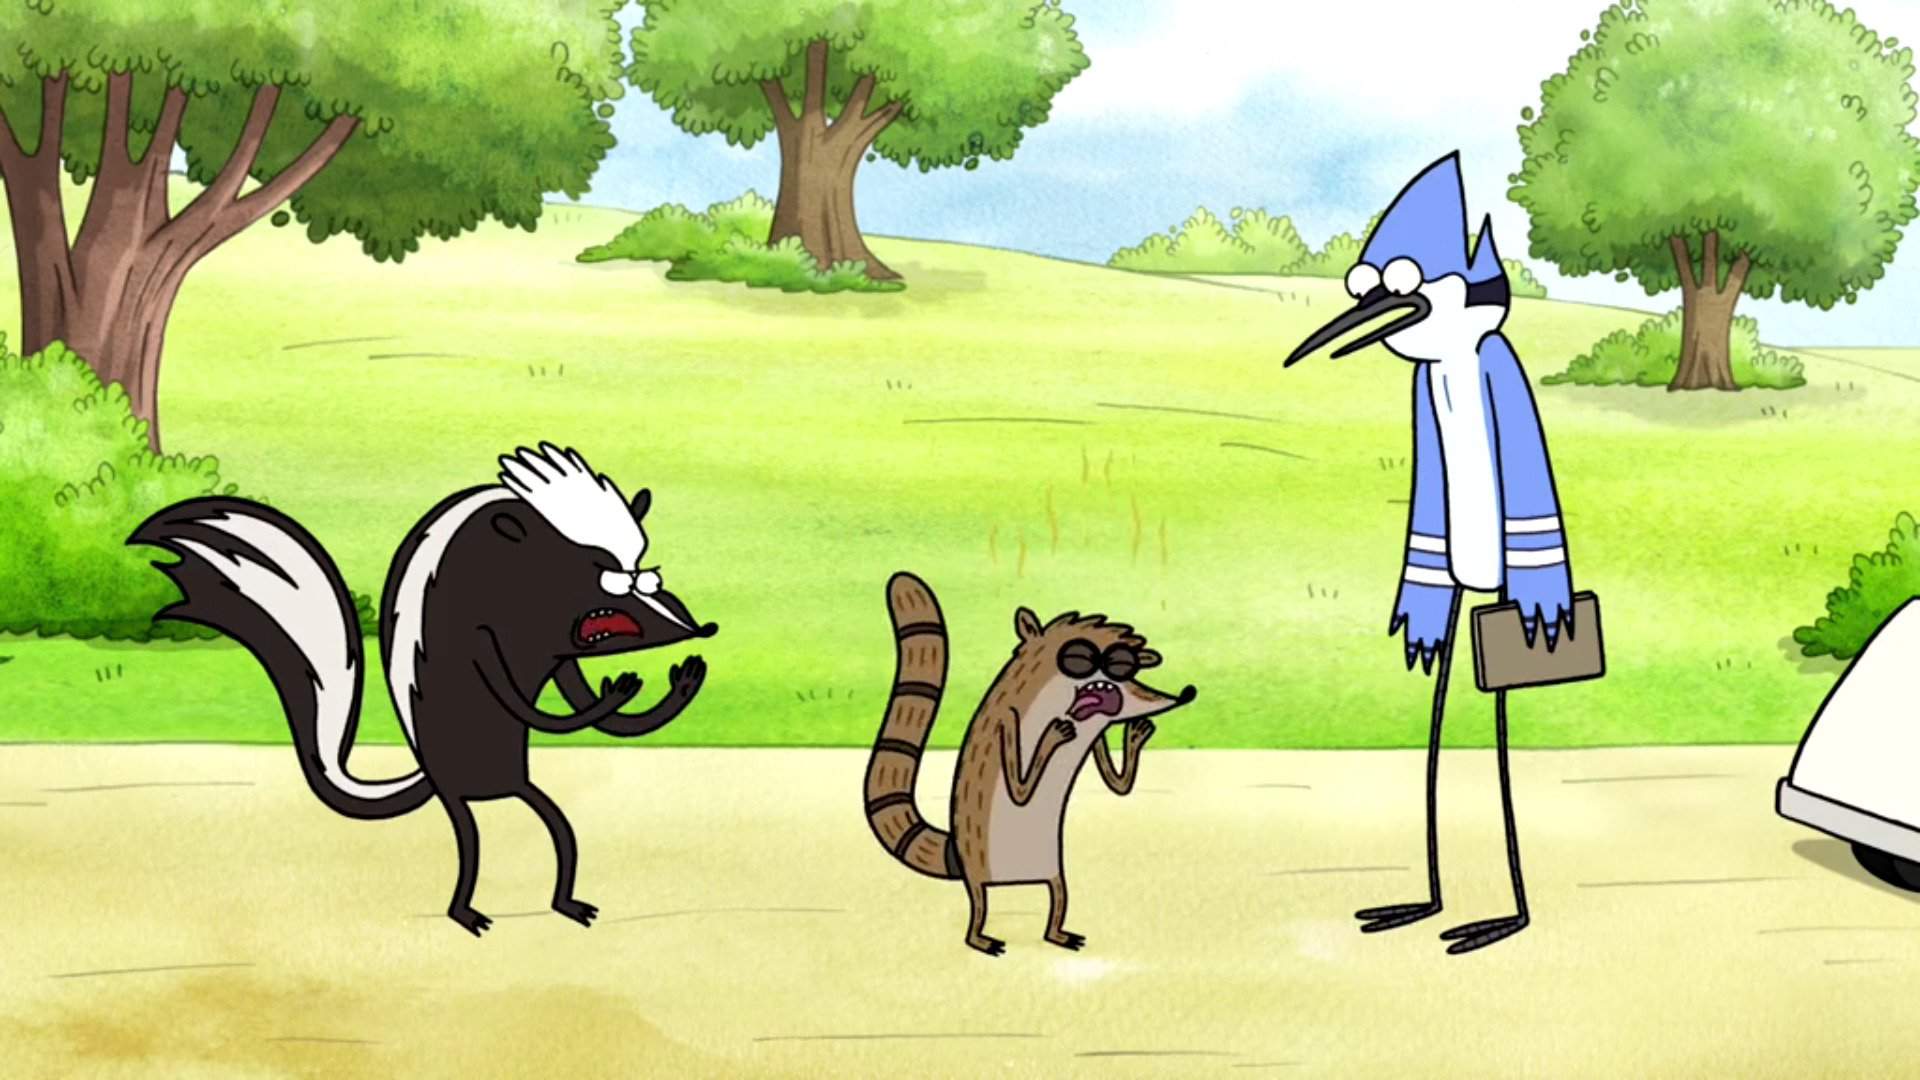 Just as Mordecai and Rigby were that close from getting their bingo, Rigby ...